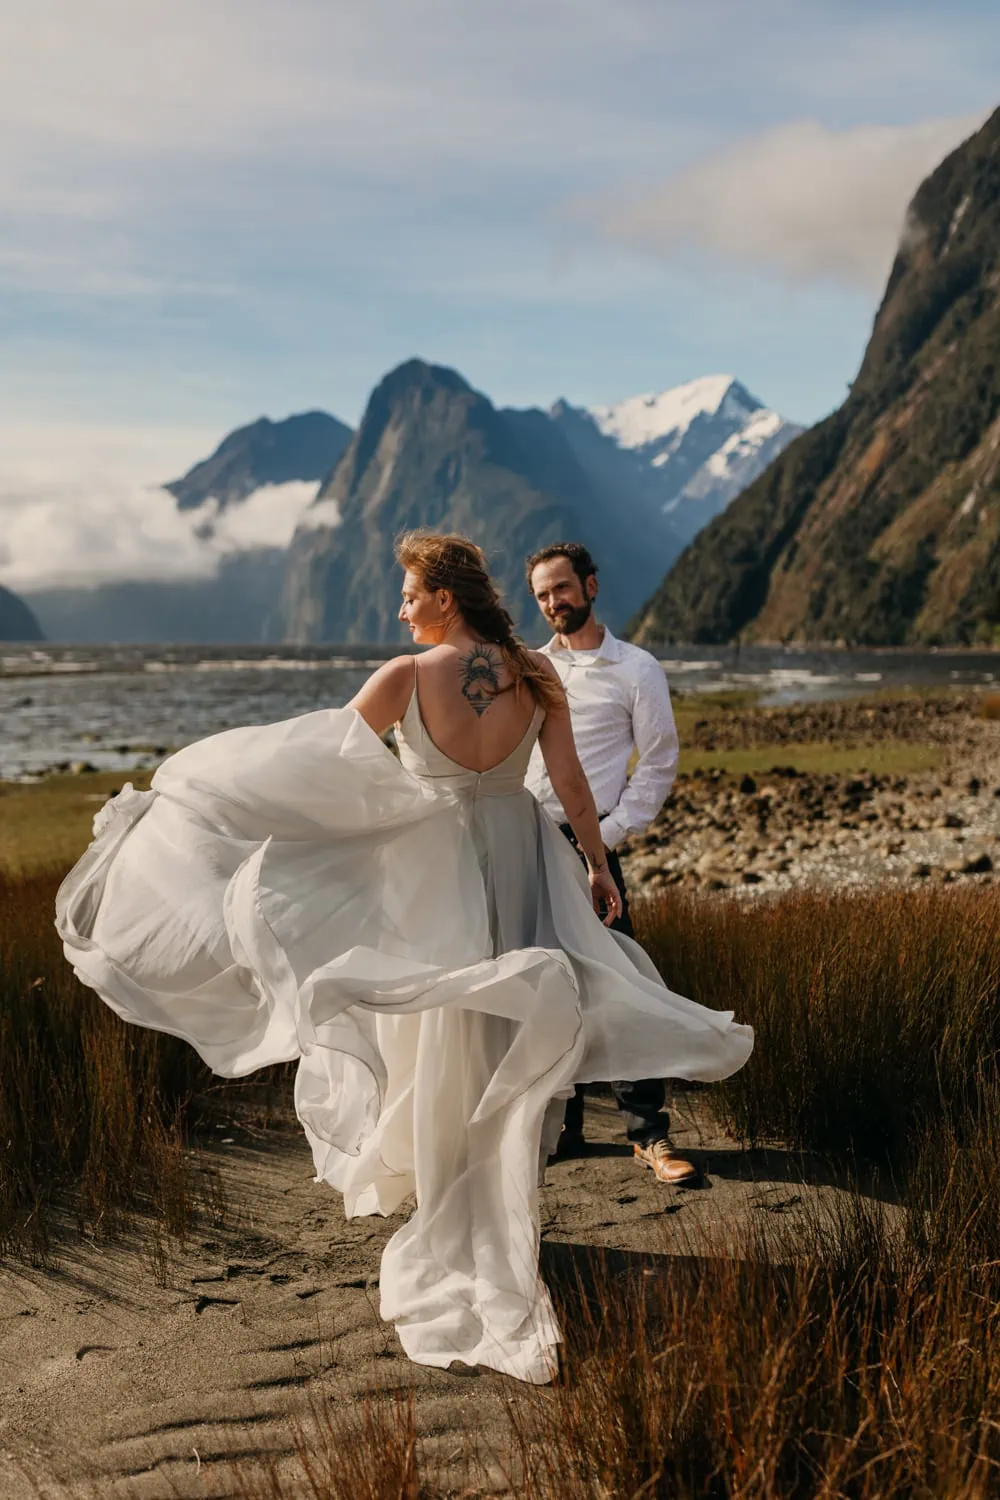 A couple poses for a photo on a windy day in Milford Sound.